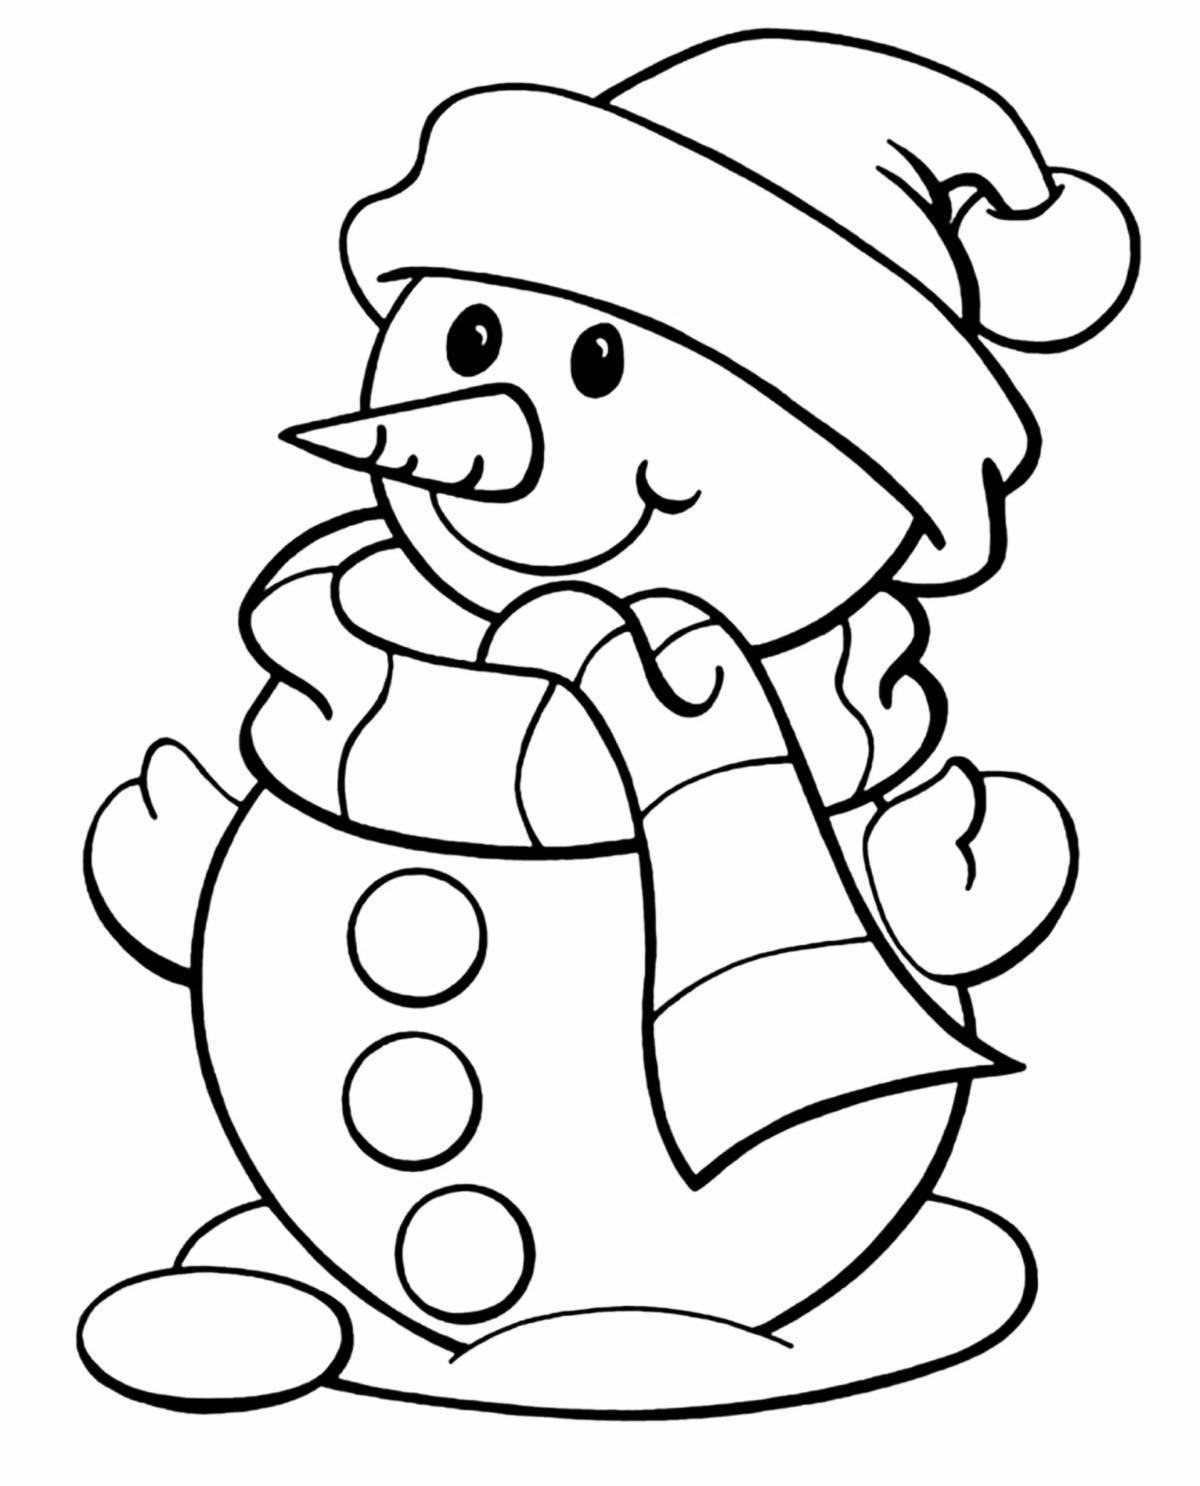 Whimsical snowman coloring book for kids 6-7 years old